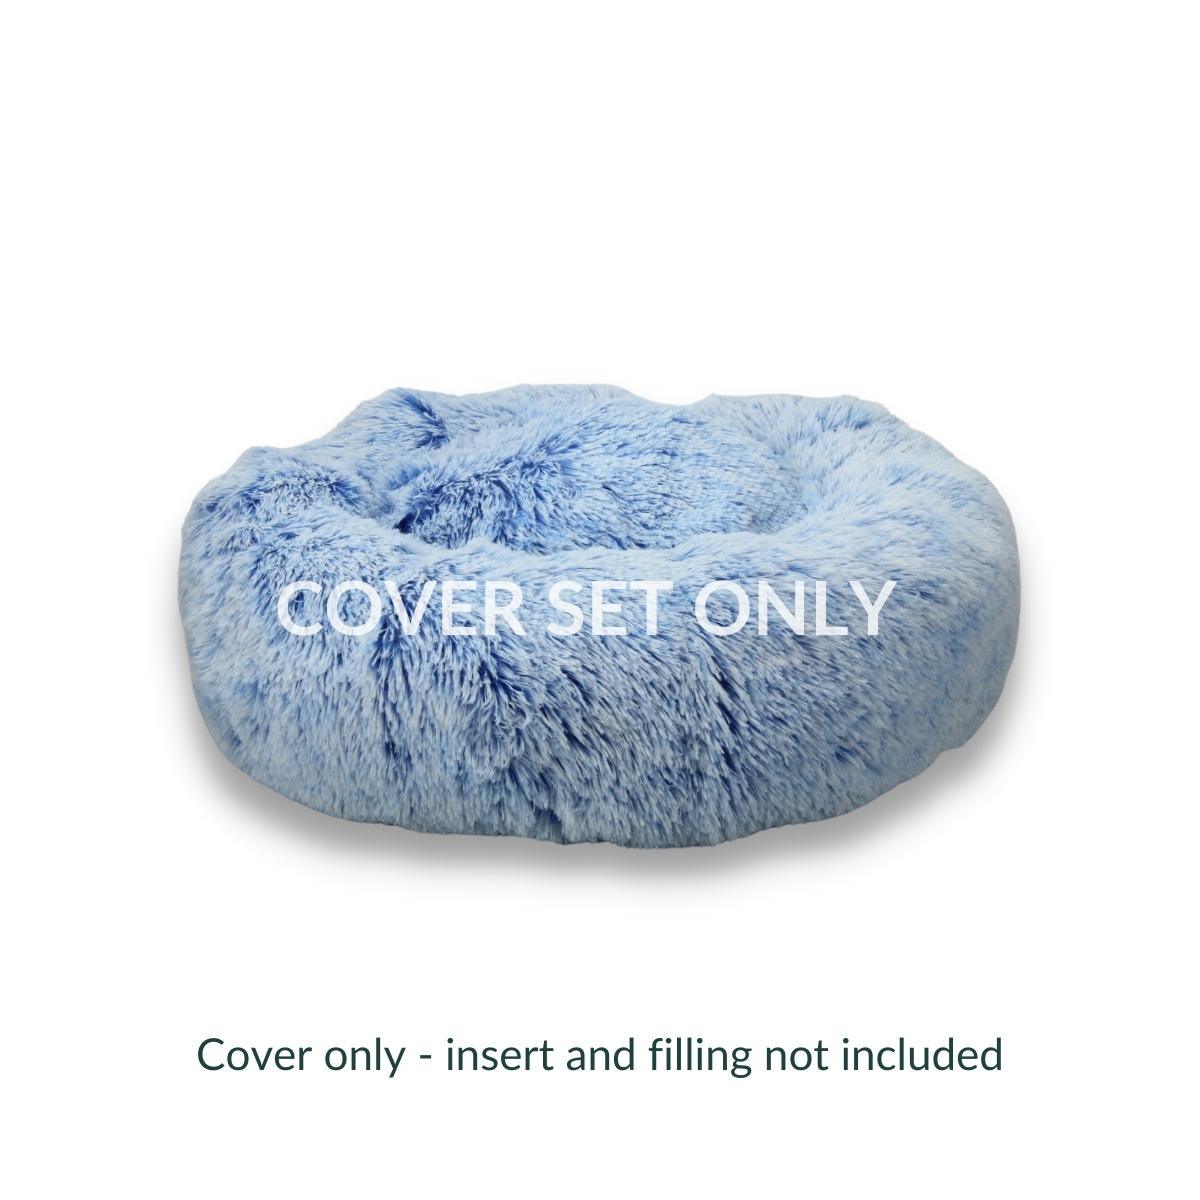 Calming Pet Bed Spare Cover - The Calming Dog Bed UK